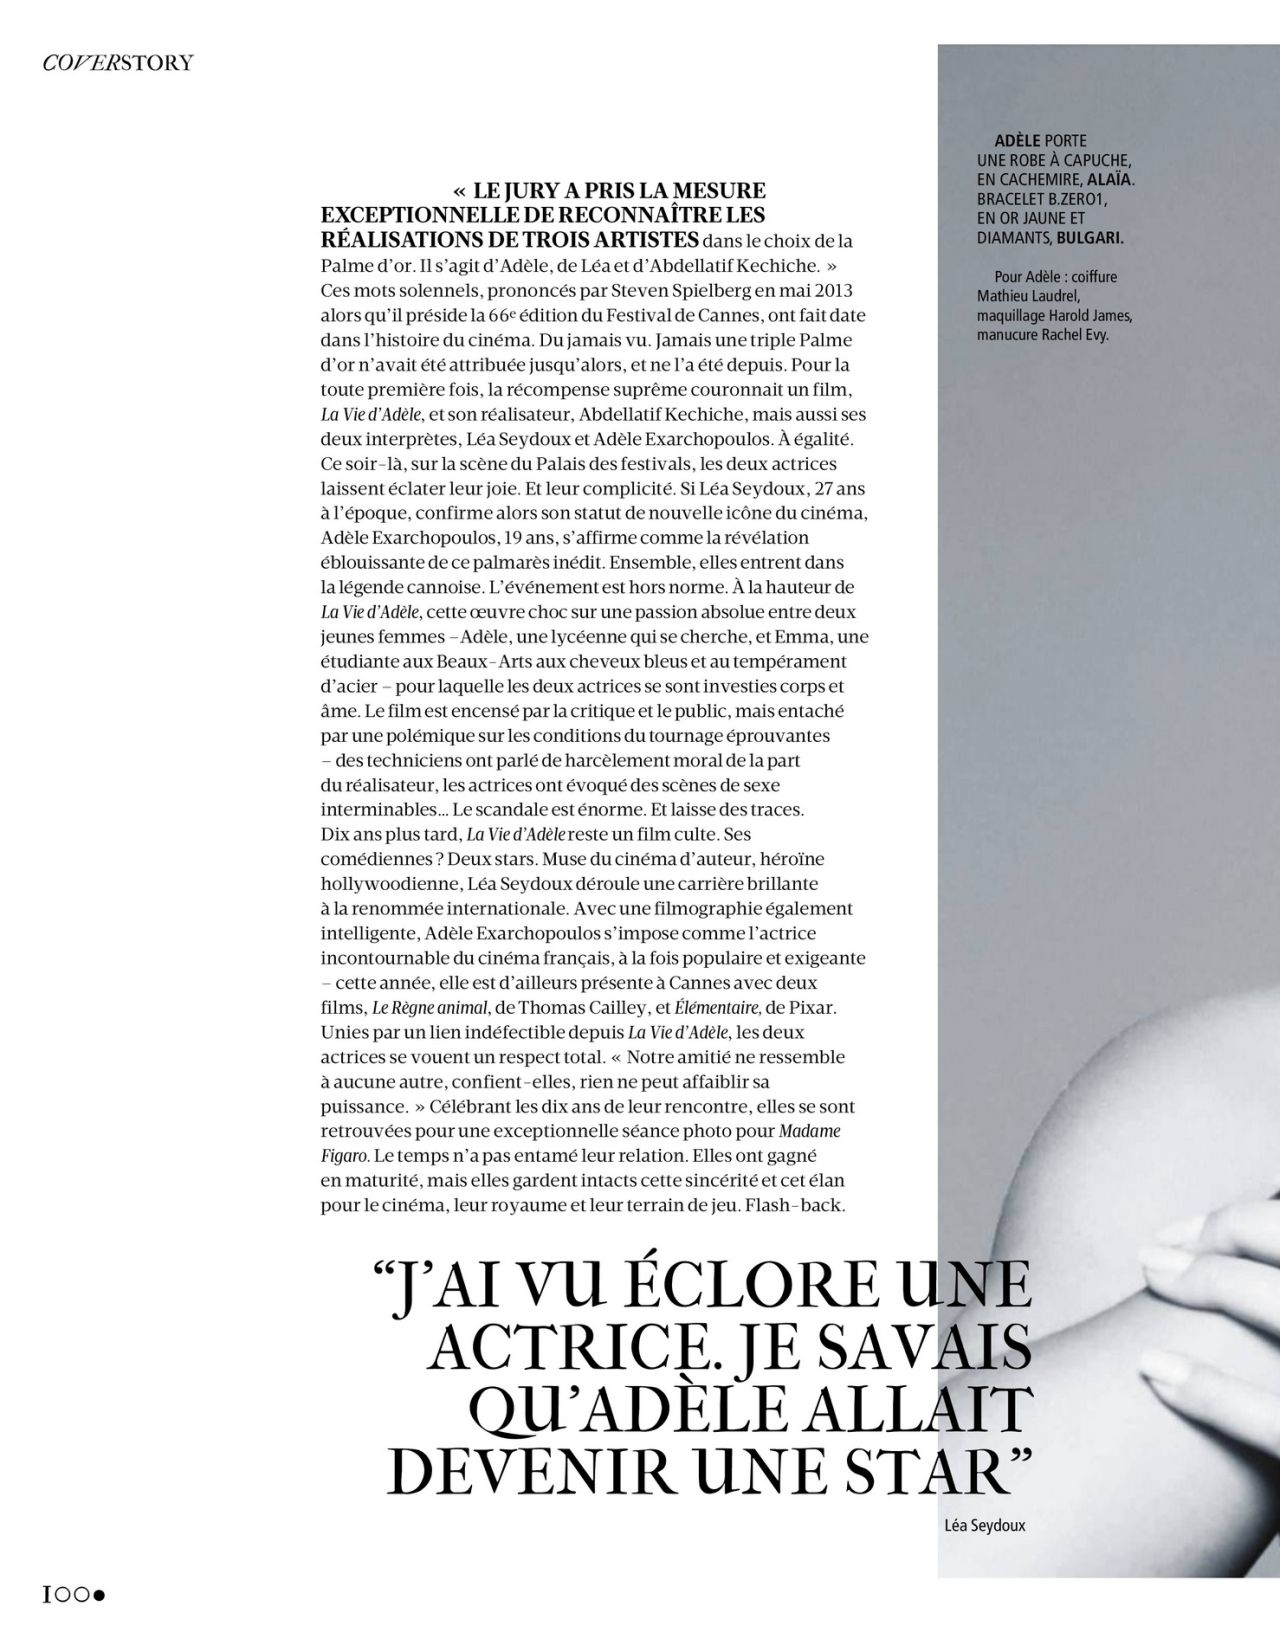 Léa Seydoux and Adèle Exarchopoulos - Madame Figaro 05/12/2023 Issue •  CelebMafia